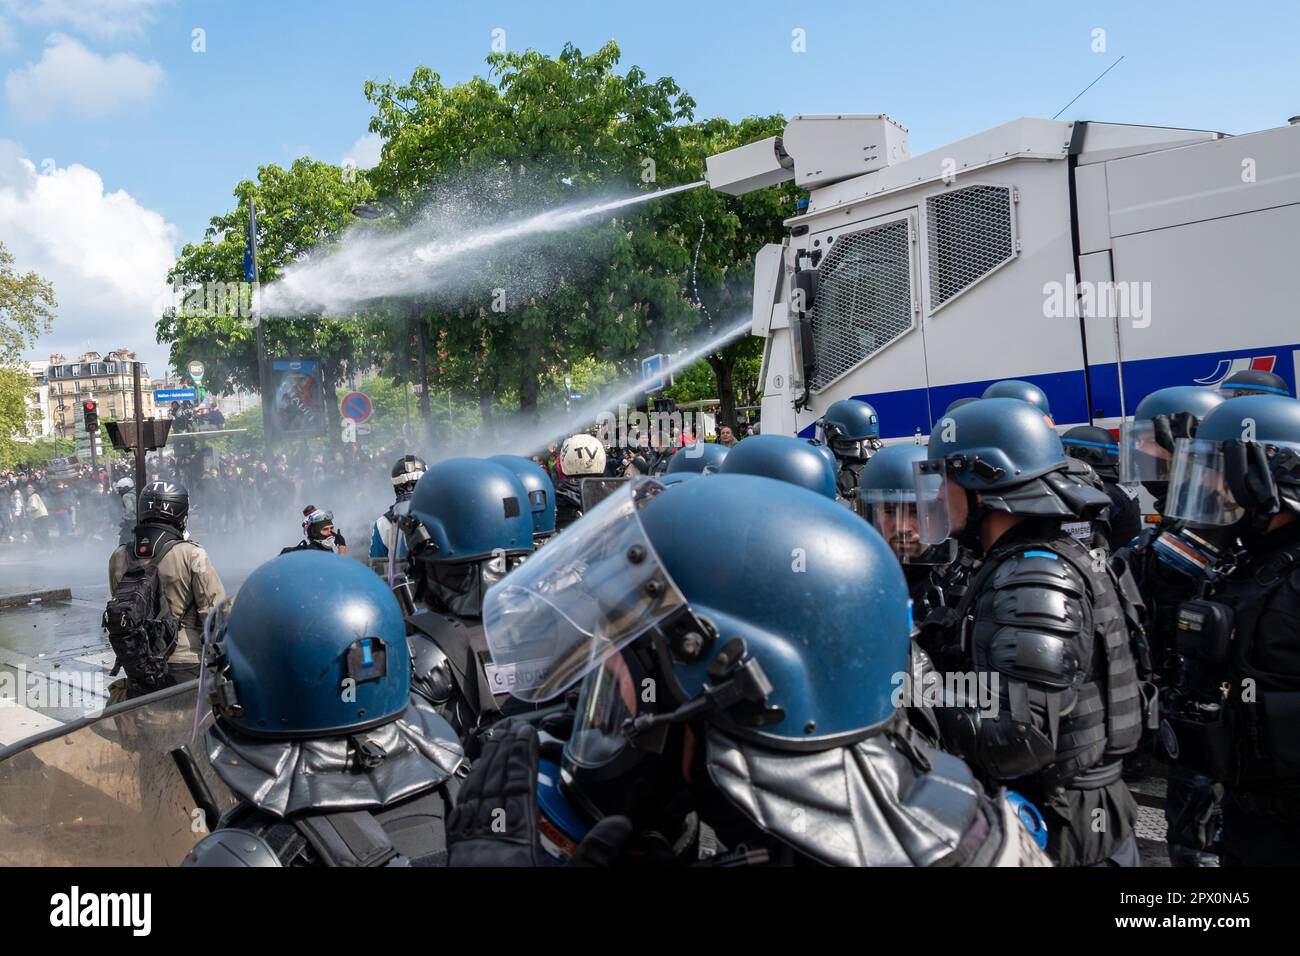 french-police-water-cannon-escorted-by-gendarmes-in-riot-gear-hosing-down-demonstrators-at-the-end-of-a-protest-against-the-retirement-reform-2PX0NA5.jpg